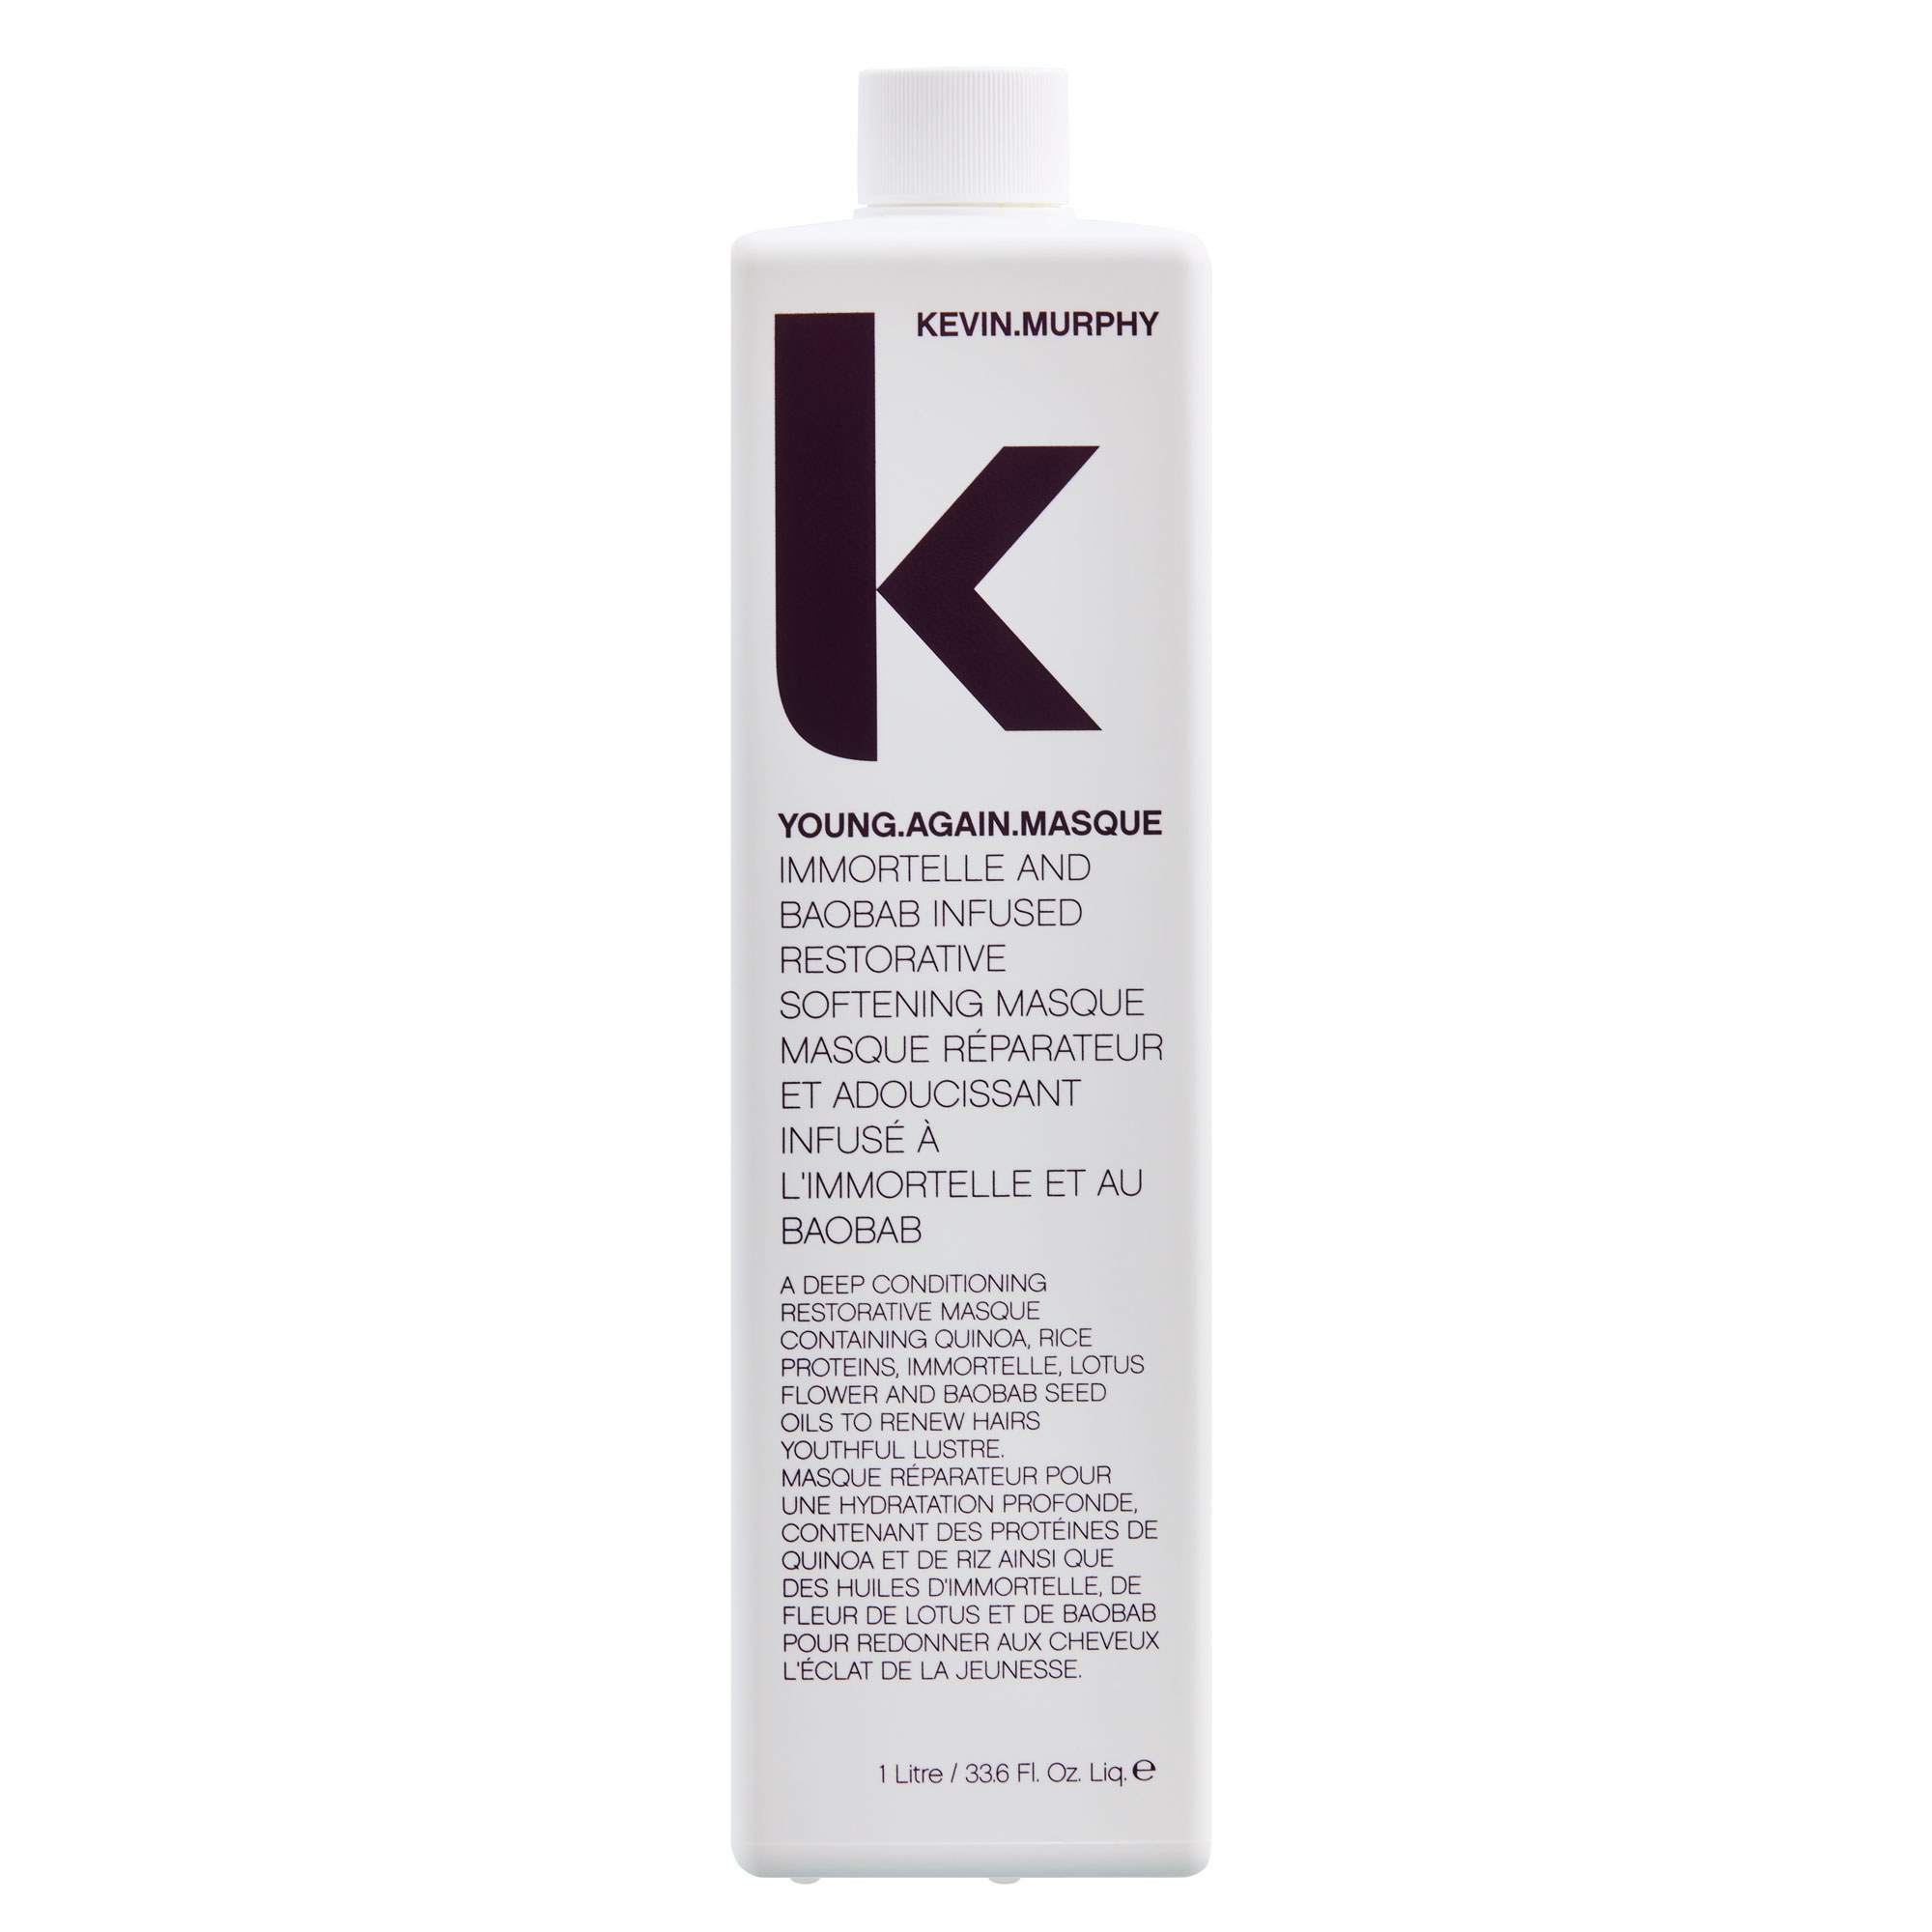 KEVIN.MURPHY YOUNG.AGAIN MASQUE 1liter